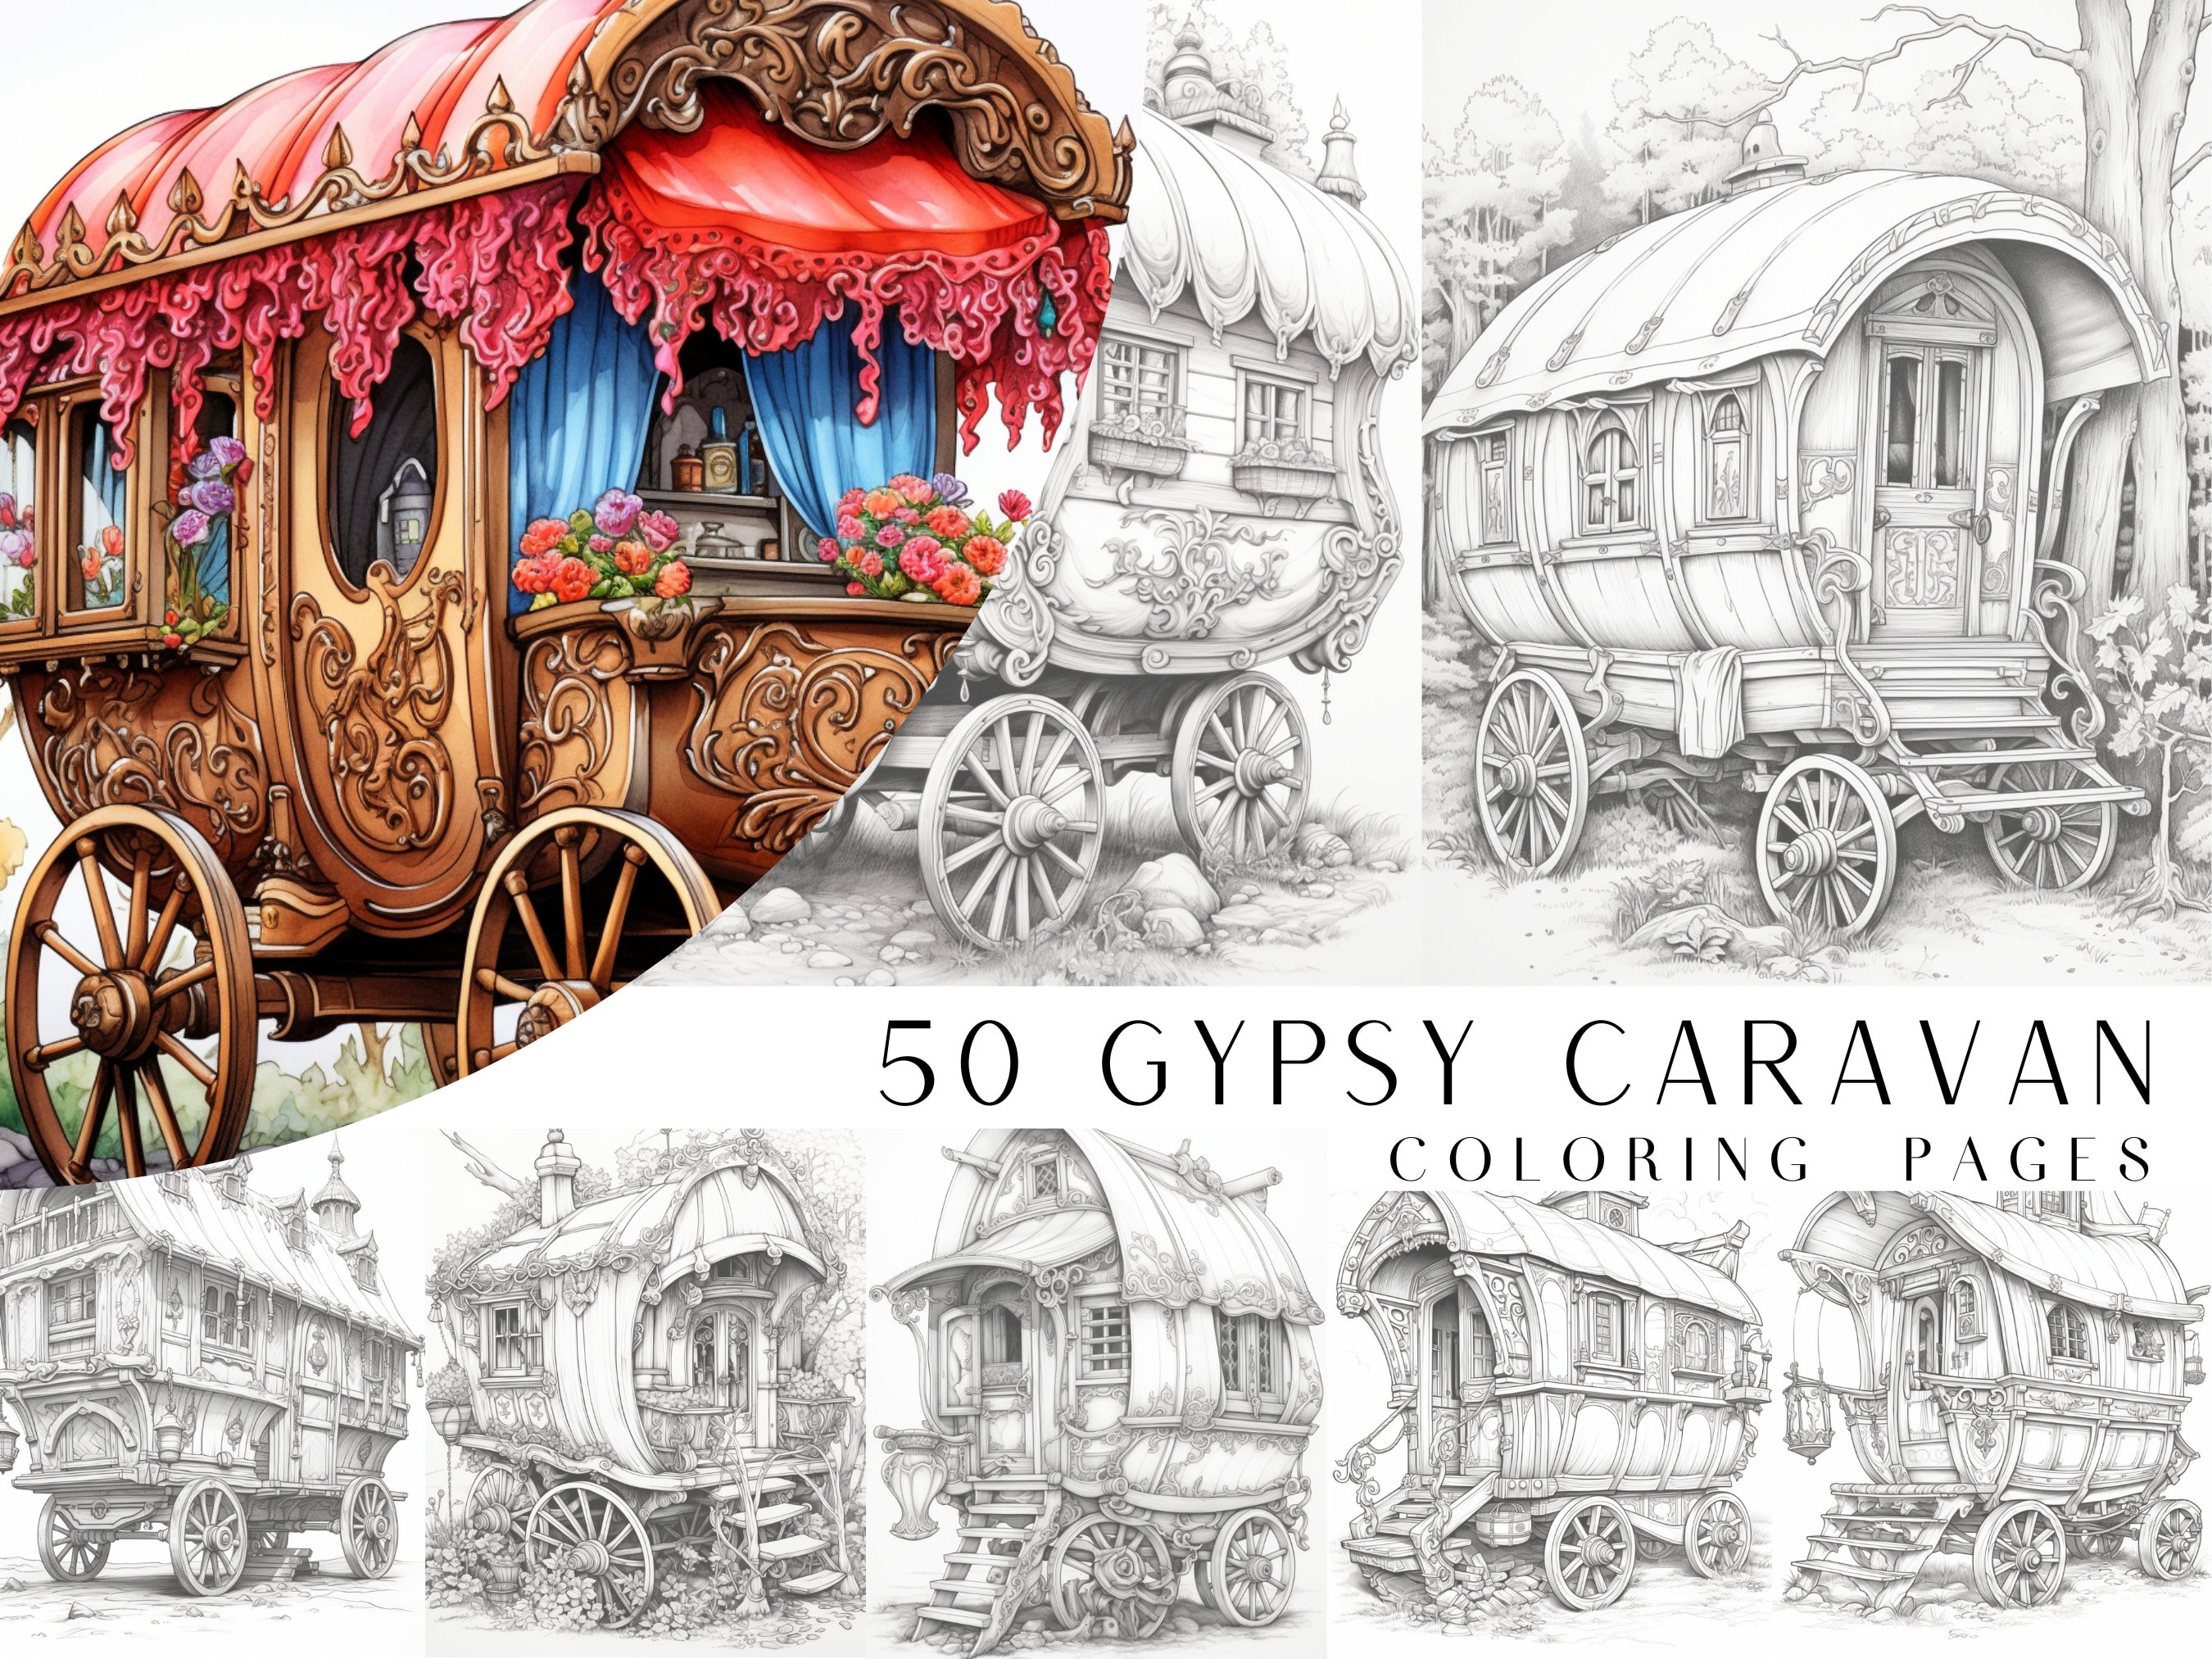 50 Gypsy Caravan Coloring Pages Adult and Kids Coloring Book, Greyscale ...